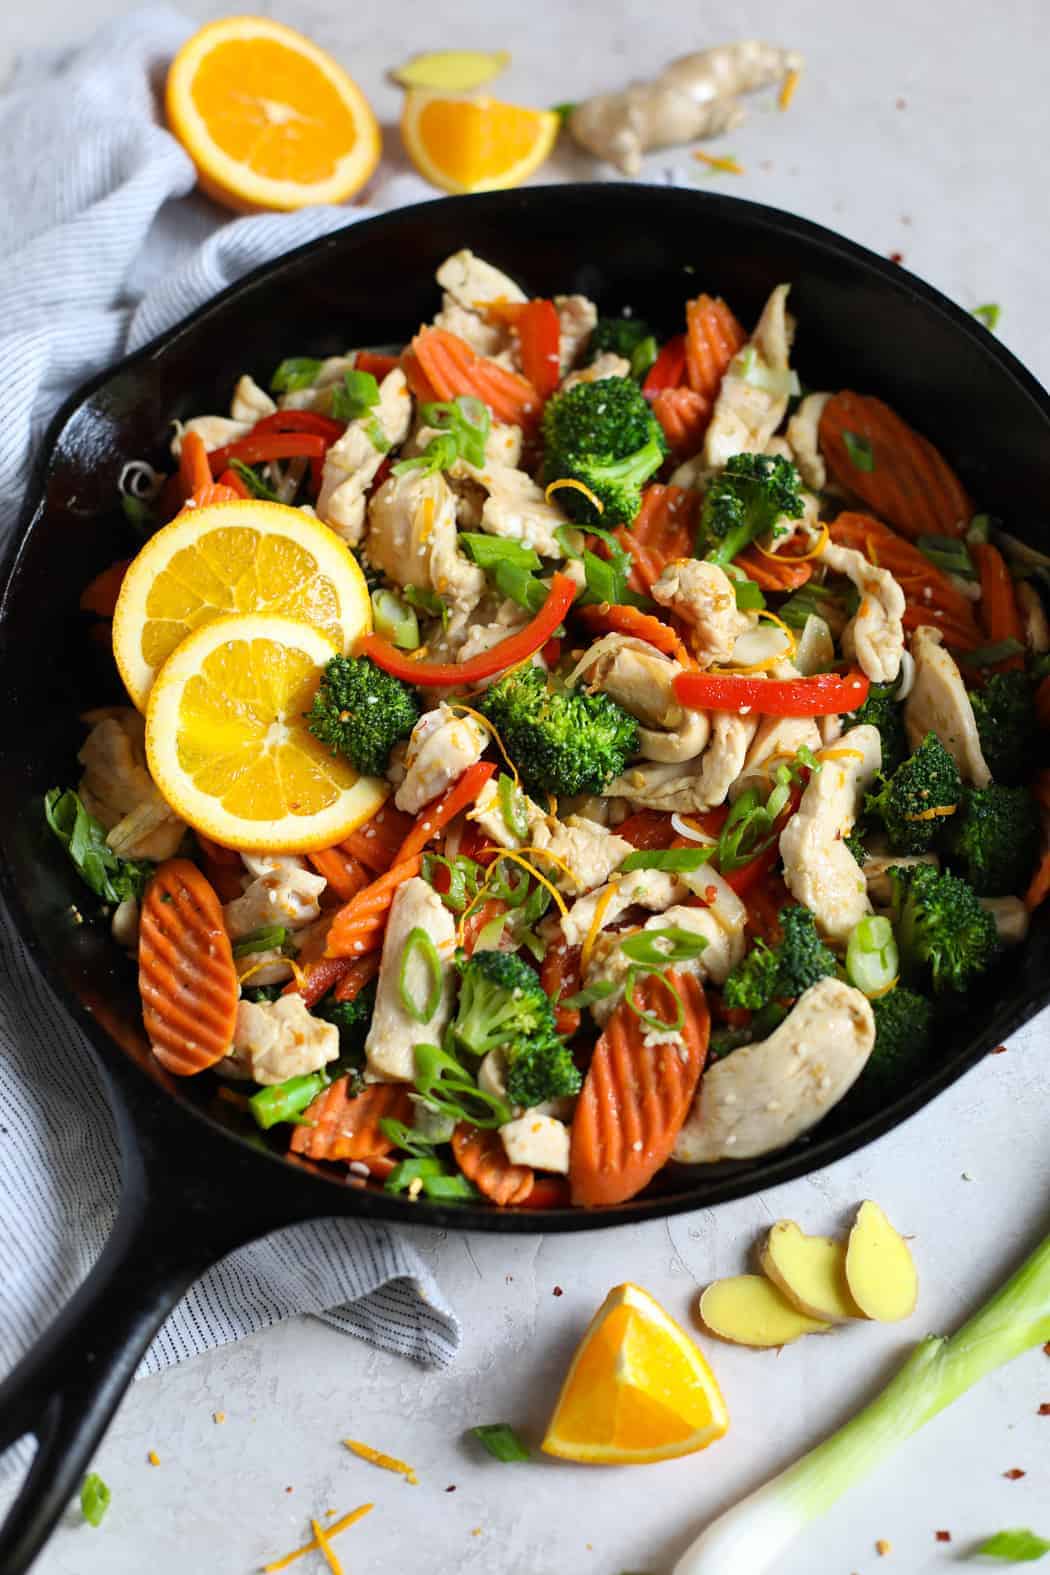 7 One-Skillet Meals - The Real Food Dietitians